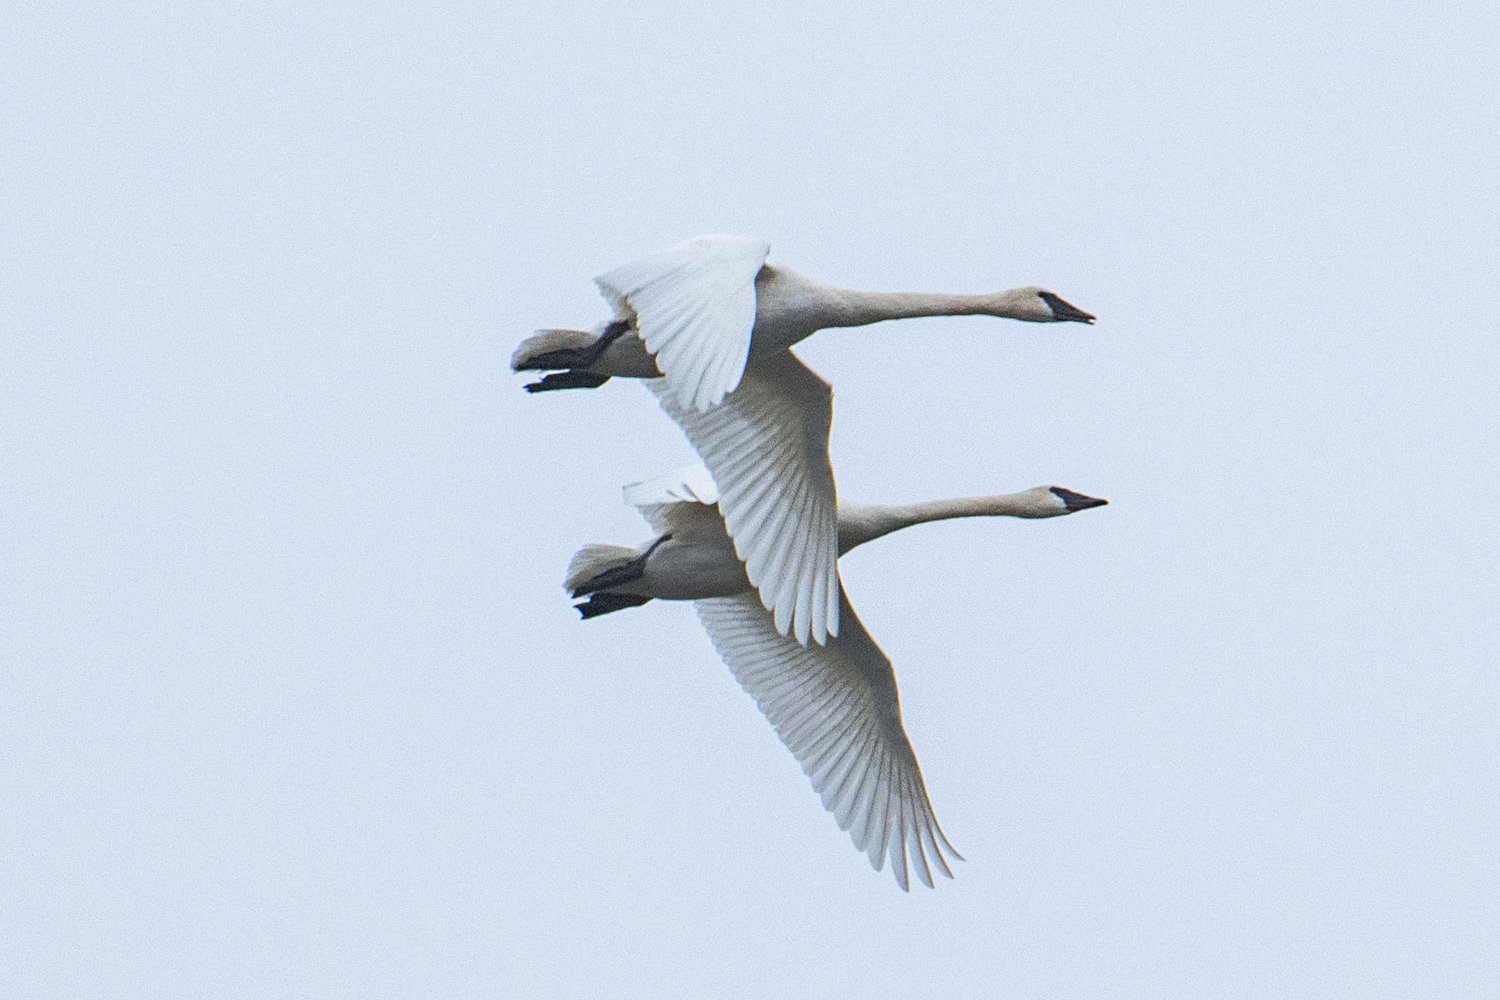 Trumpeter swans, likely a mating pair, flap their wings in sync on Friday in Chehalis. Swans often mate for life.